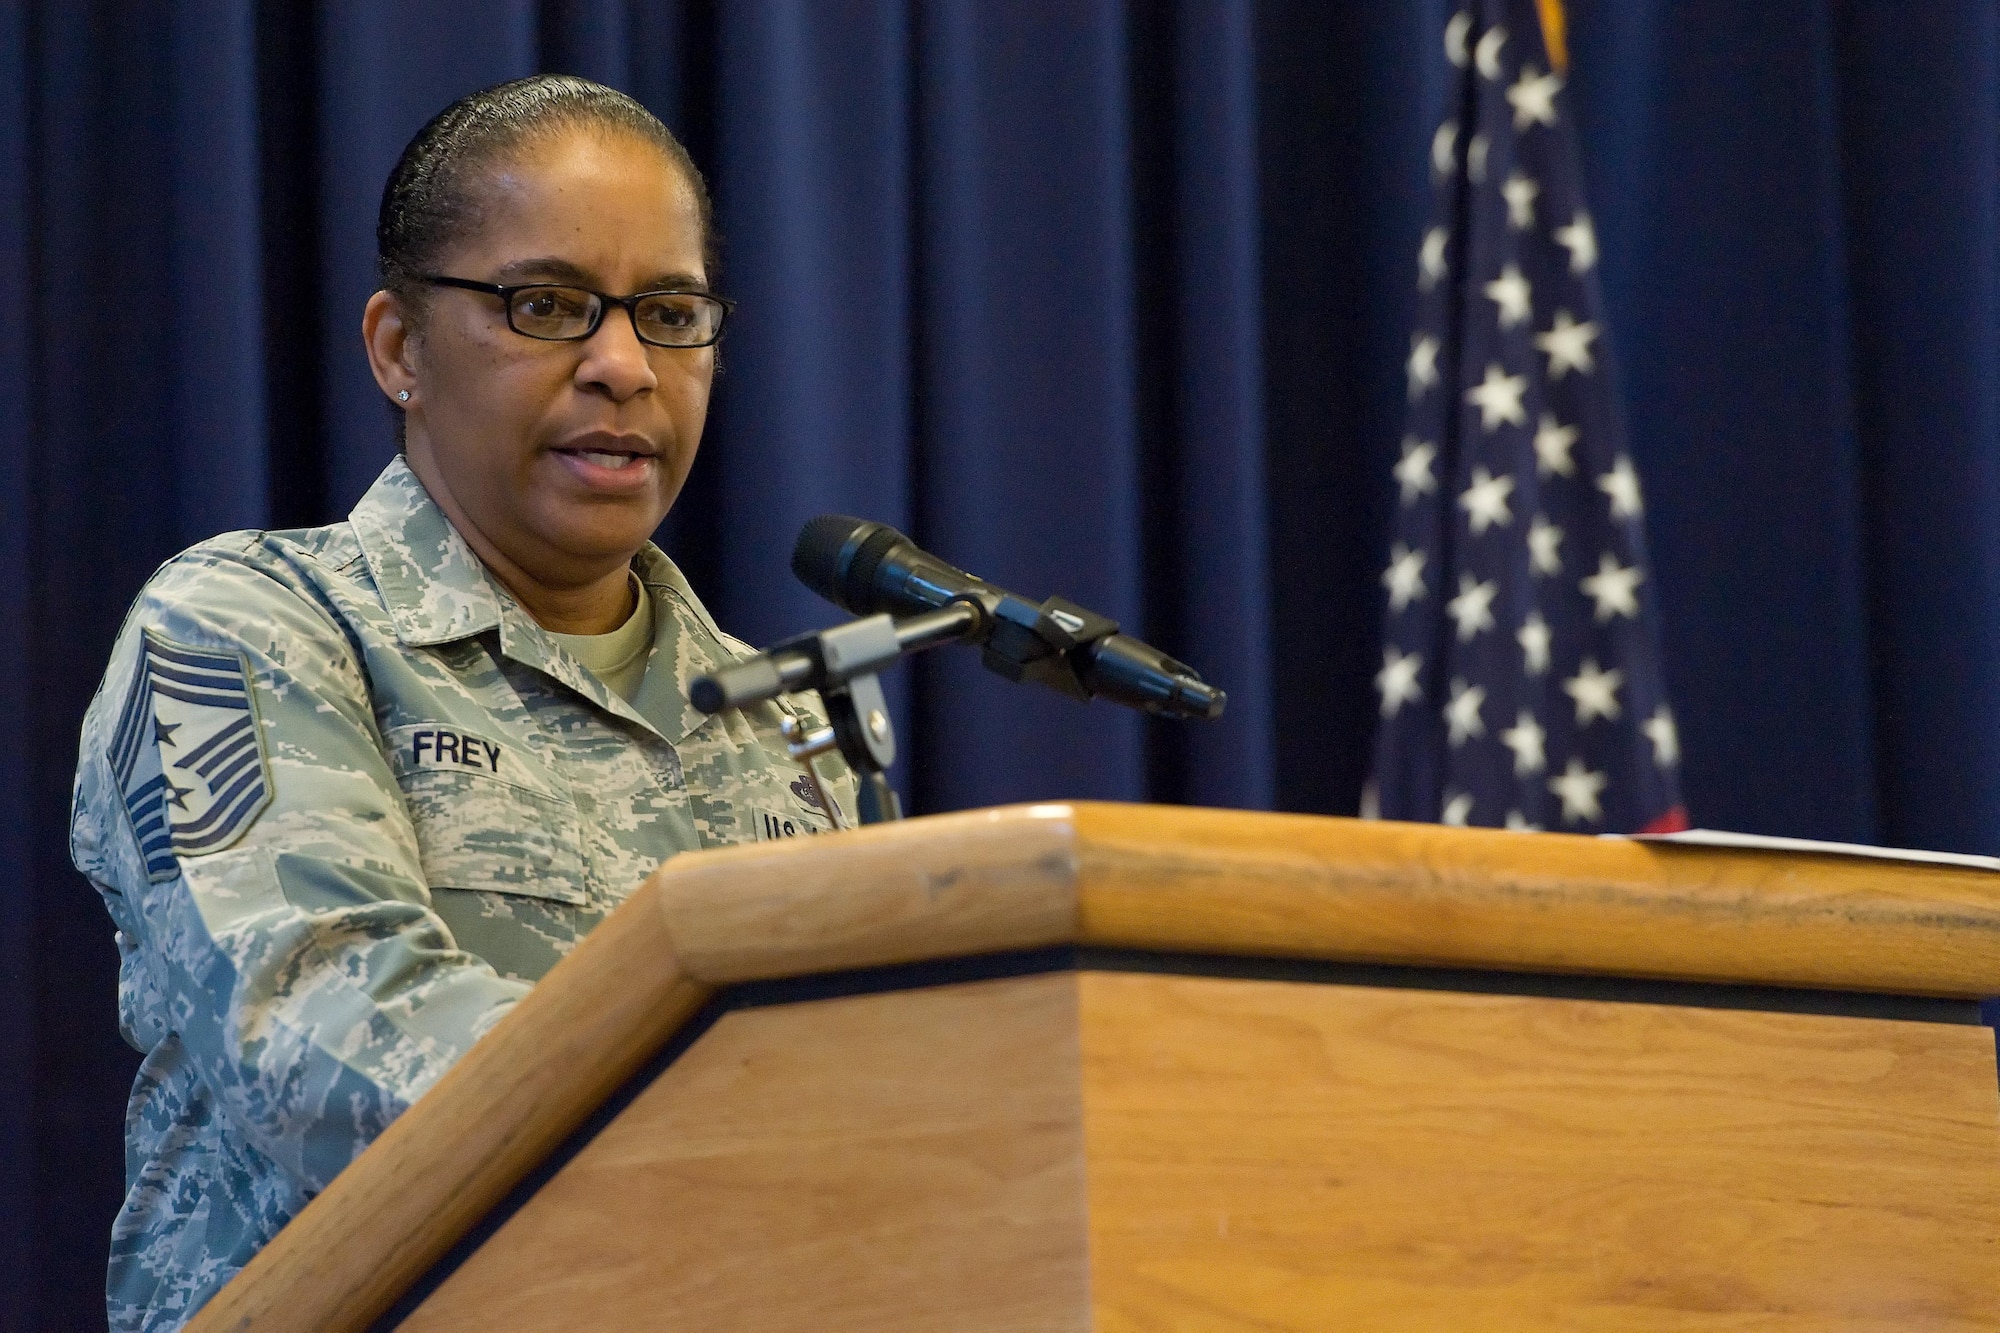 As guest speaker for the Women's History Month Breakfast, Chief Master Sgt. Shelina Frey, command chief for Air Mobility Command, Scott Air Force Base, Ill., speaks to Team Dover members March 20, 2017, at The Landings on Dover Air Force Base, Del. During her speech, Frey stated she would not be where is today without good mentors. (U.S. Air Force photo by Roland Balik)